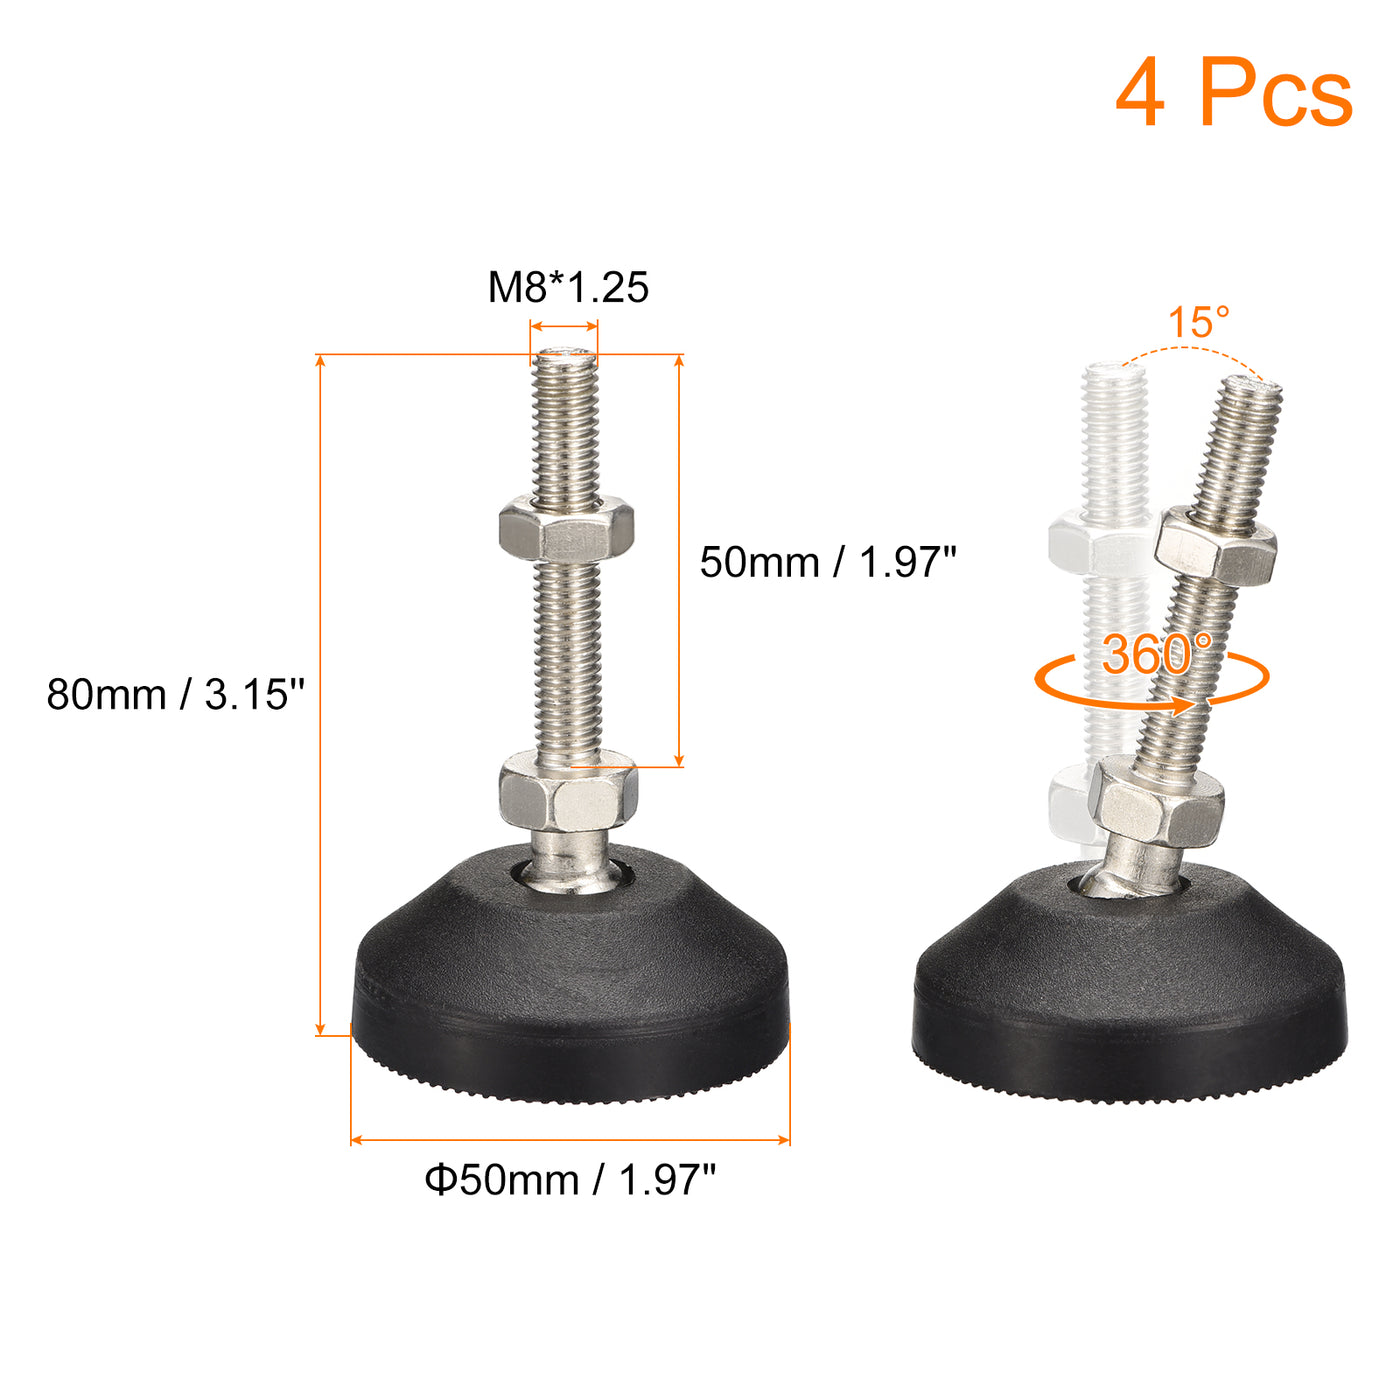 uxcell Uxcell Furniture Levelers, 4Pcs M8x50x50mm Nylon Universal Leveling Feet, Adjustable Swivel Table Feet for Furniture Workshop Machines Machinery Equipment